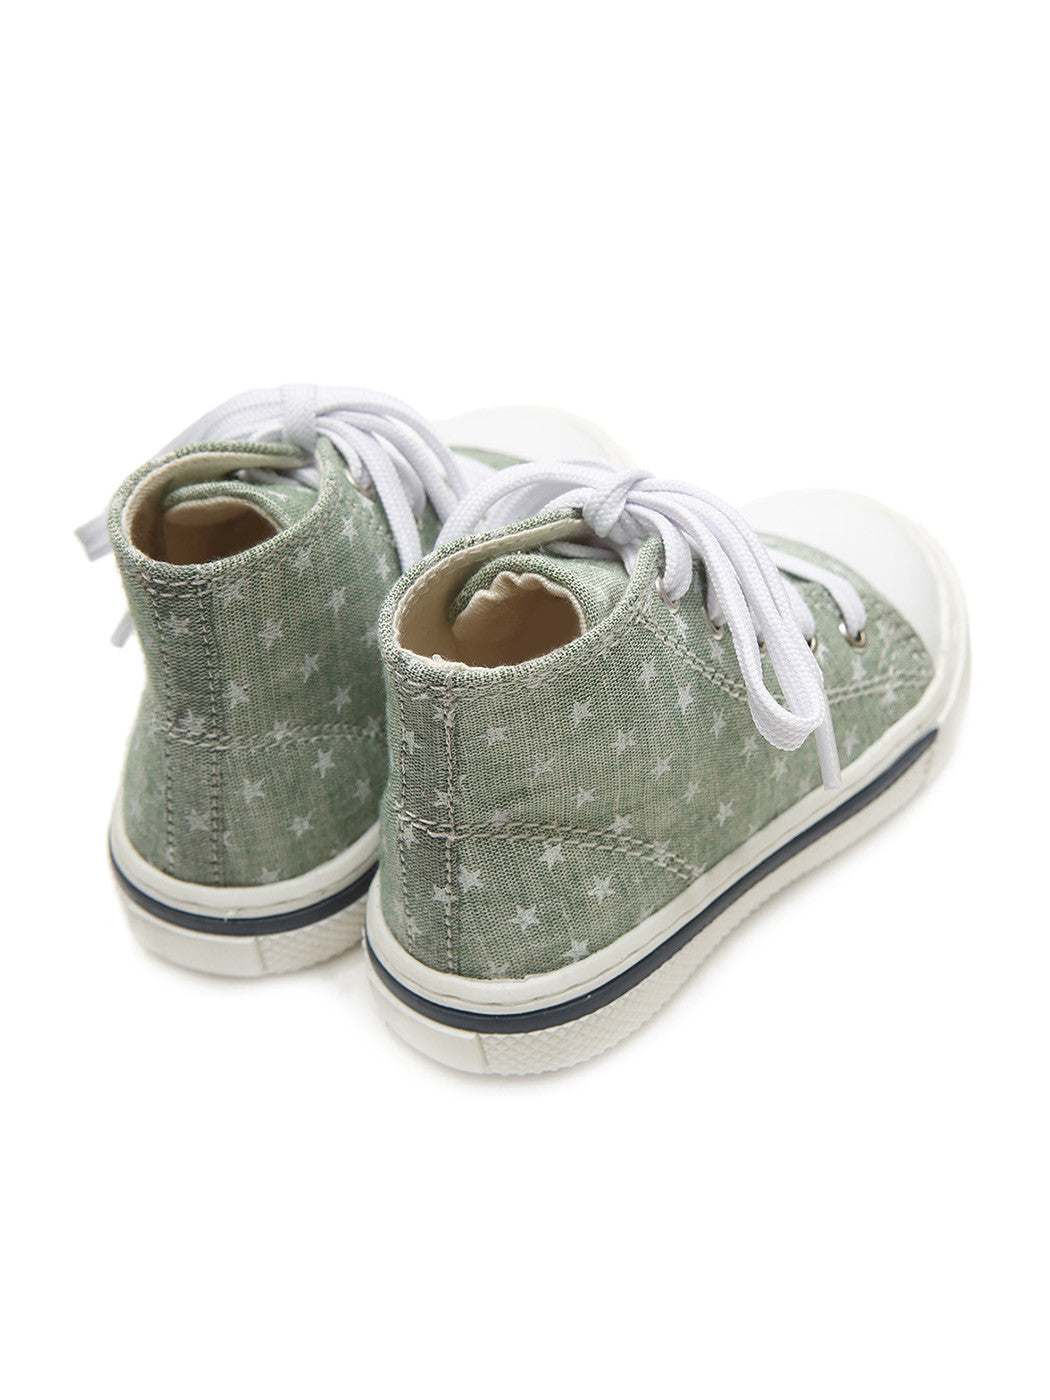 Baby bootie shoe for boy- Green